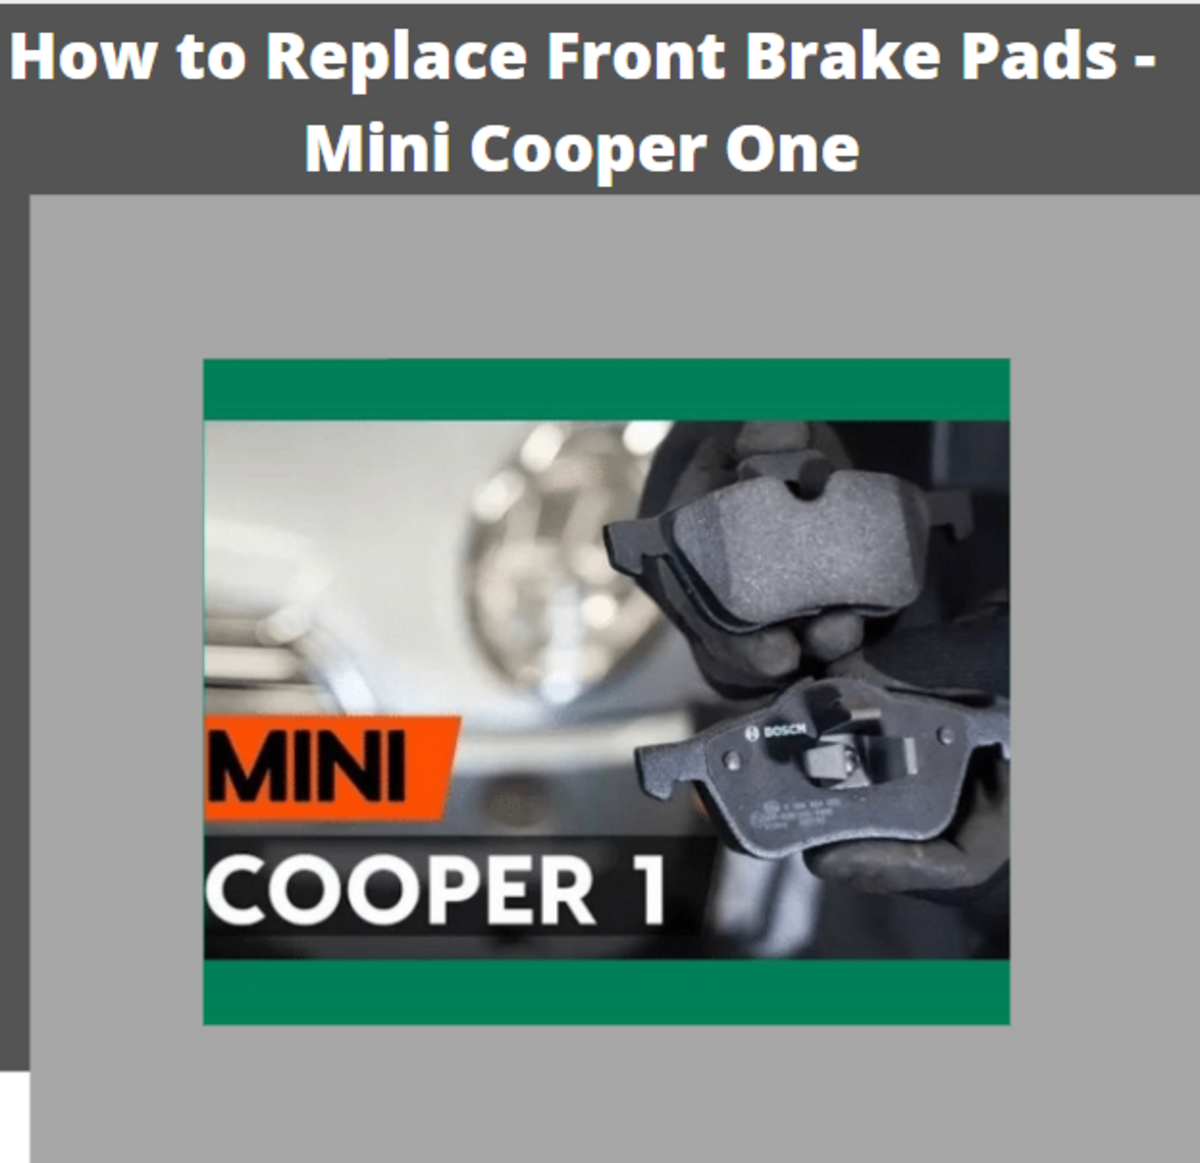 Go ahead and have fun with car maintenance on your Mini Cooper One.